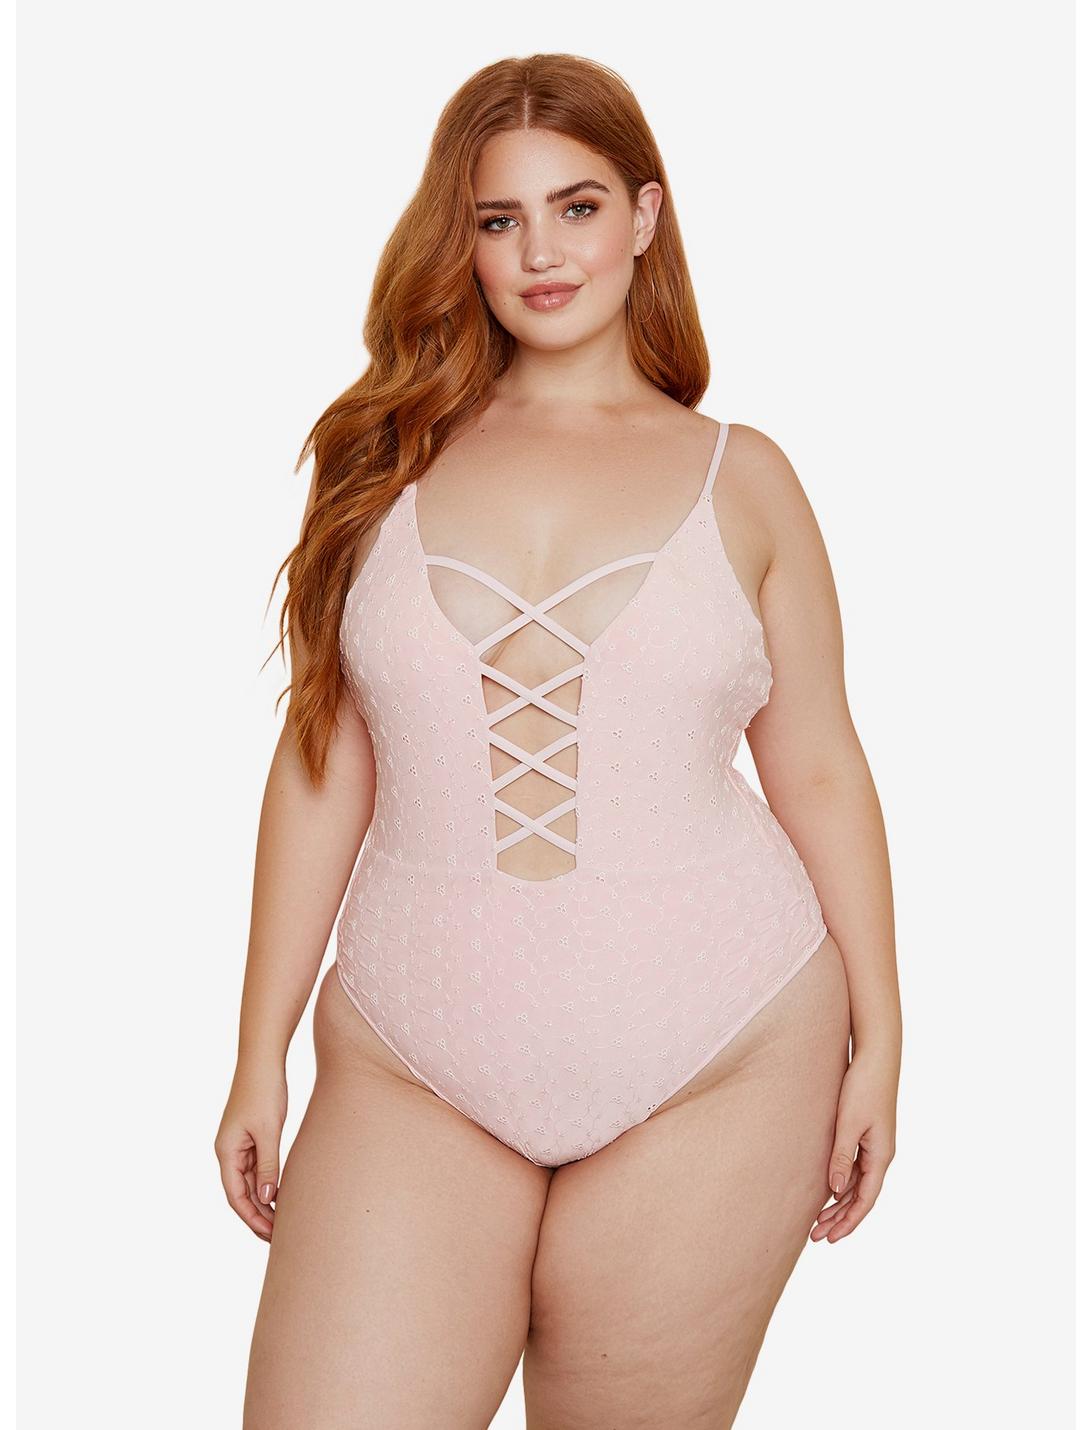 Dippin' Daisy's Bliss Swimsuit Rosewater Eyelet Plus Size, PINK, hi-res